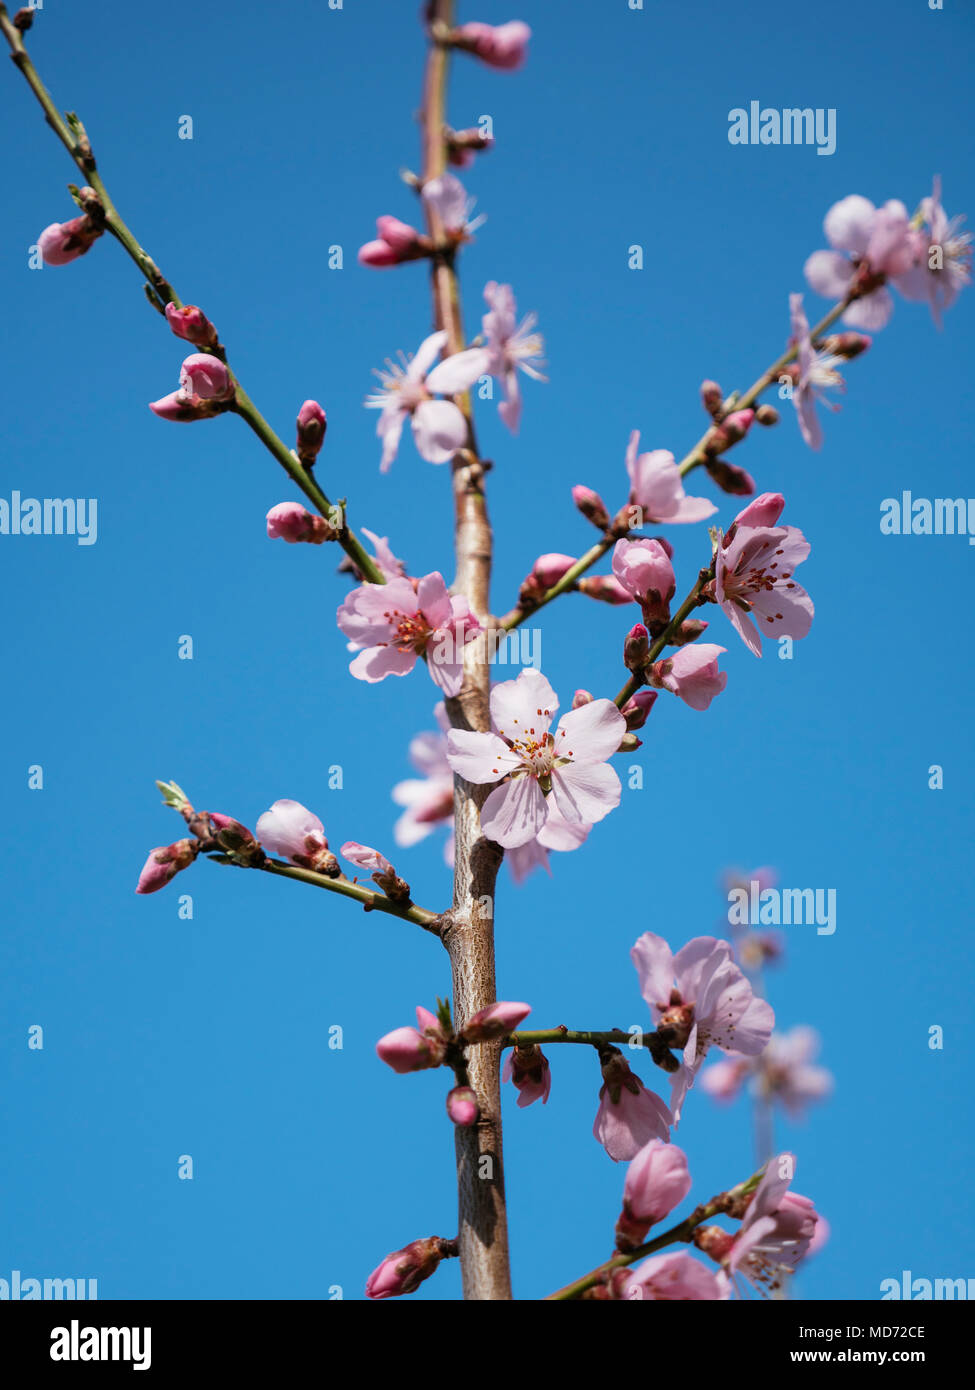 Almond tree in bloom in early spring. Stock Photo